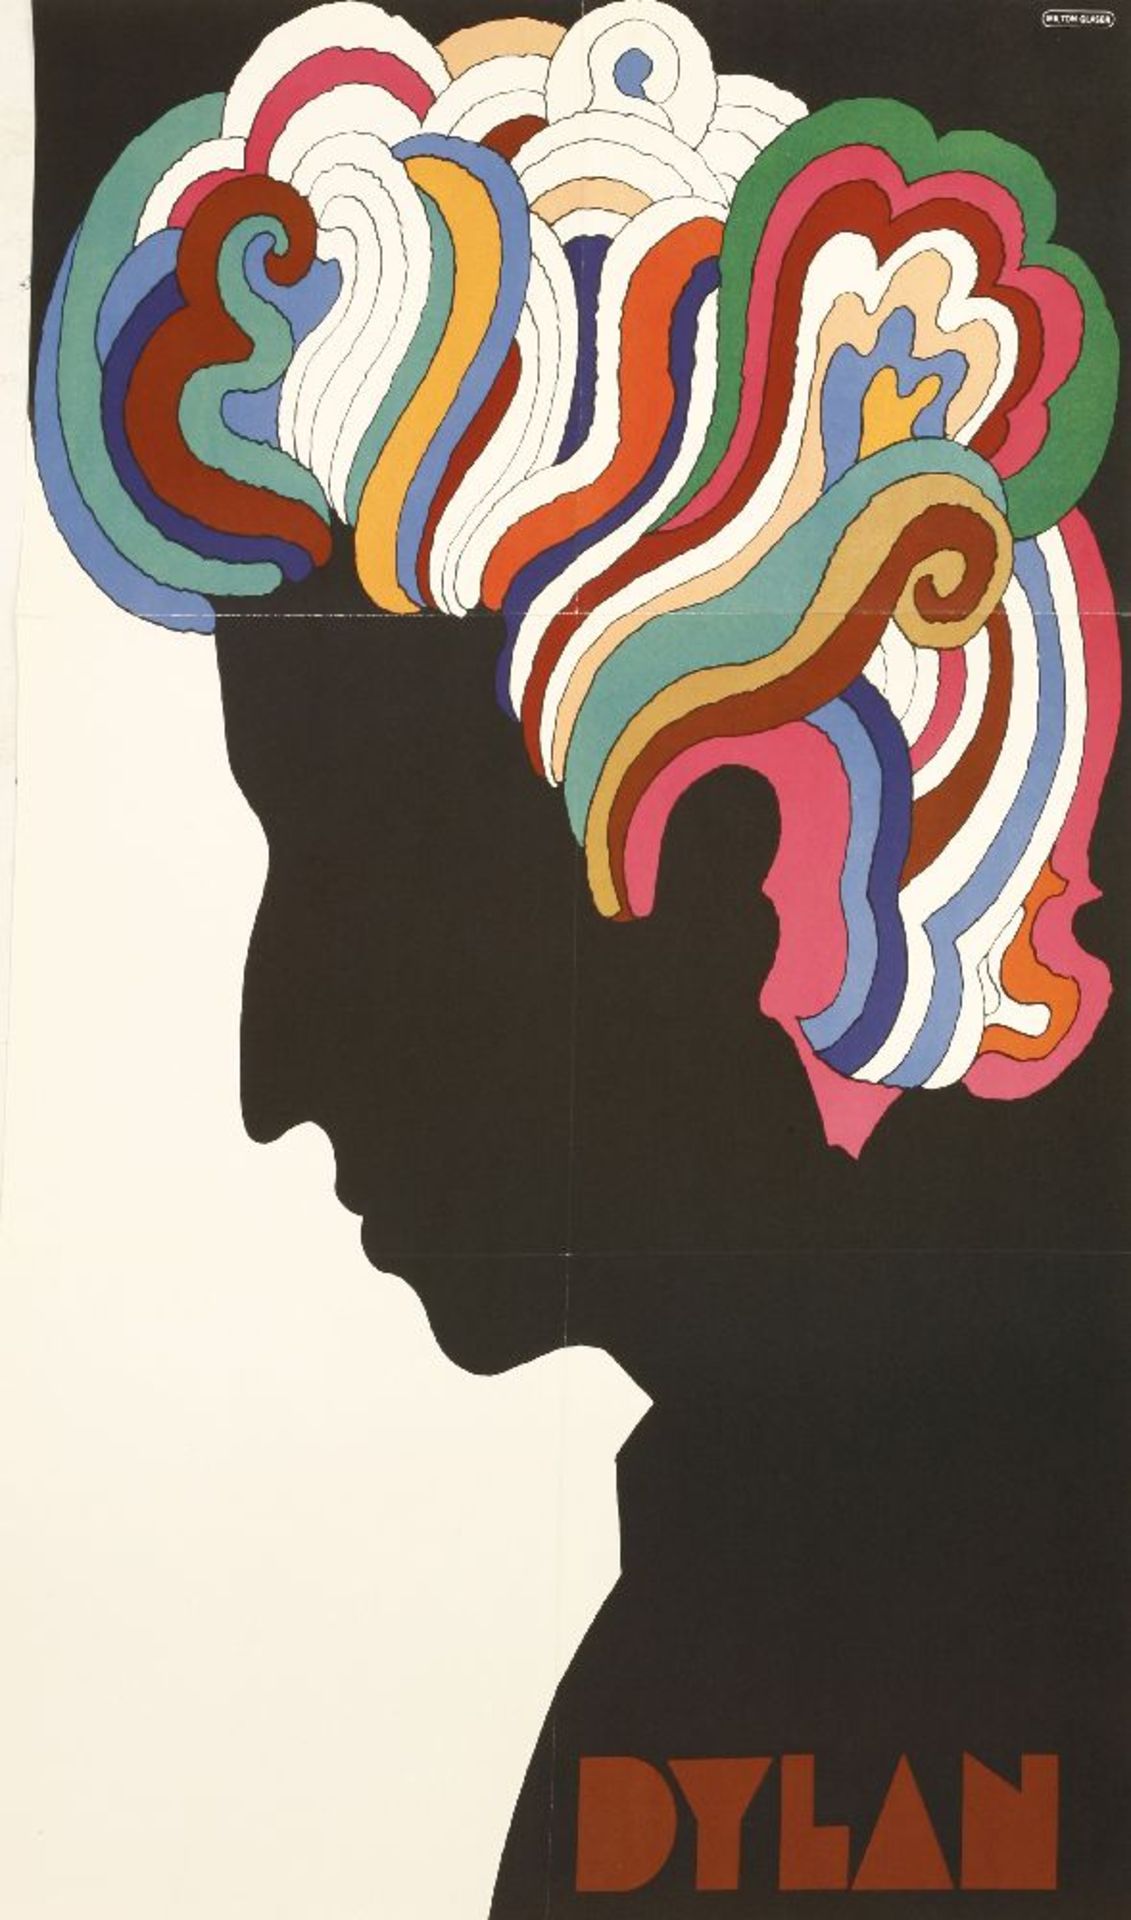 DYLAN1966 American music poster designed by Milton Glaser, published by CBS records,84 x 56cmAfter